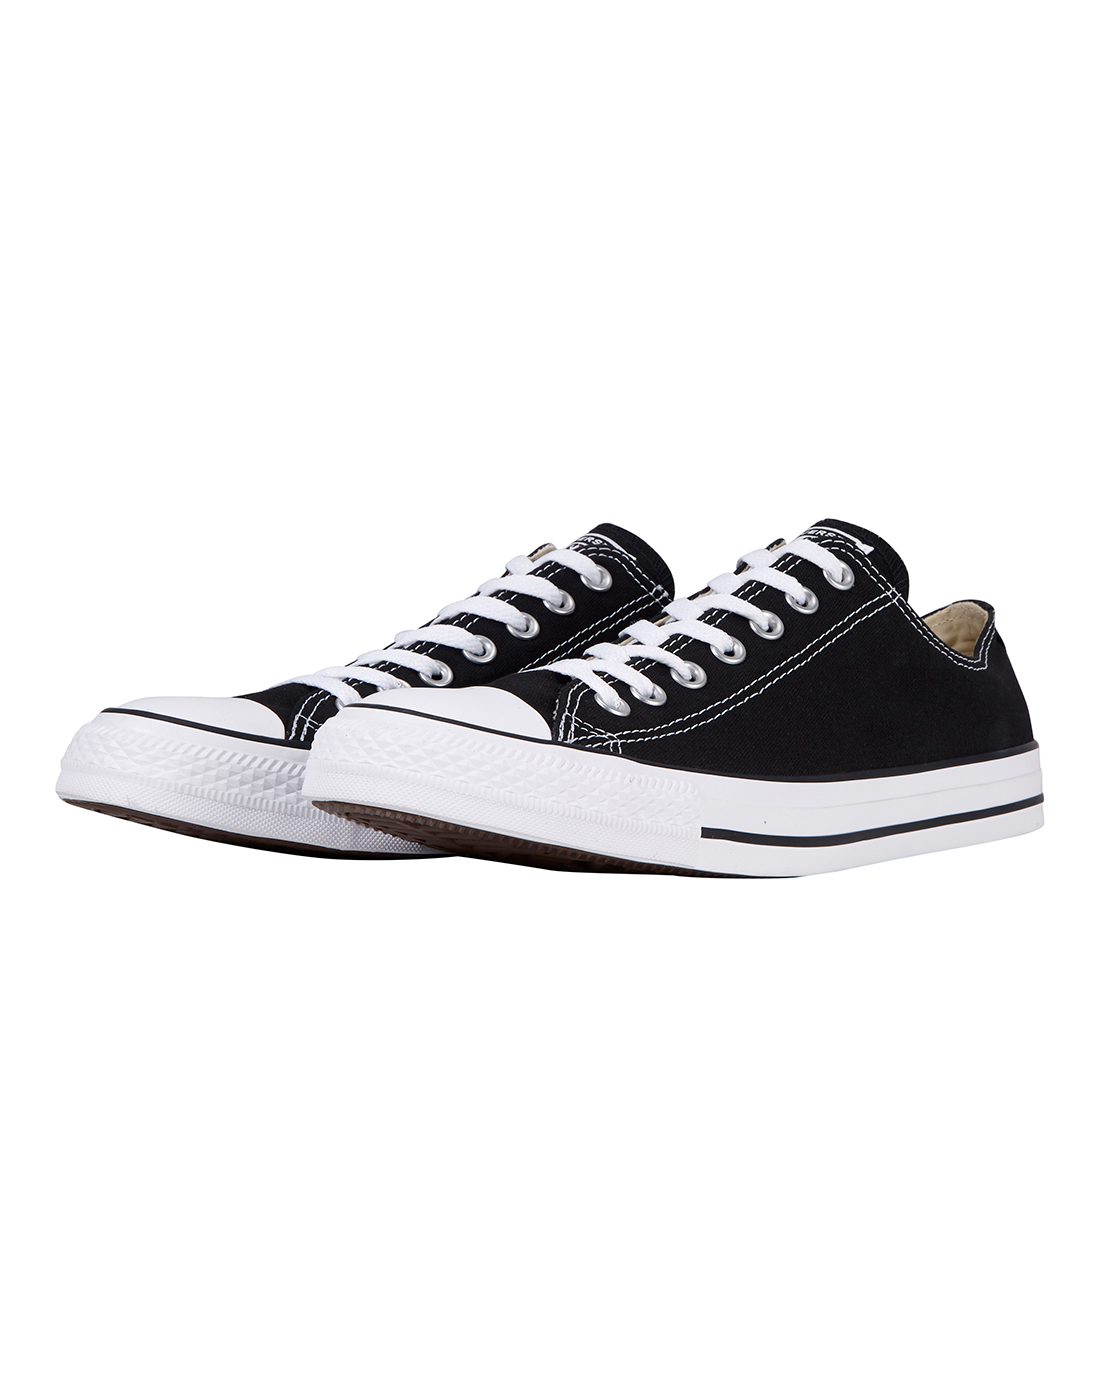 Converse Mens All Star Ox - Black | Life Style Sports UK